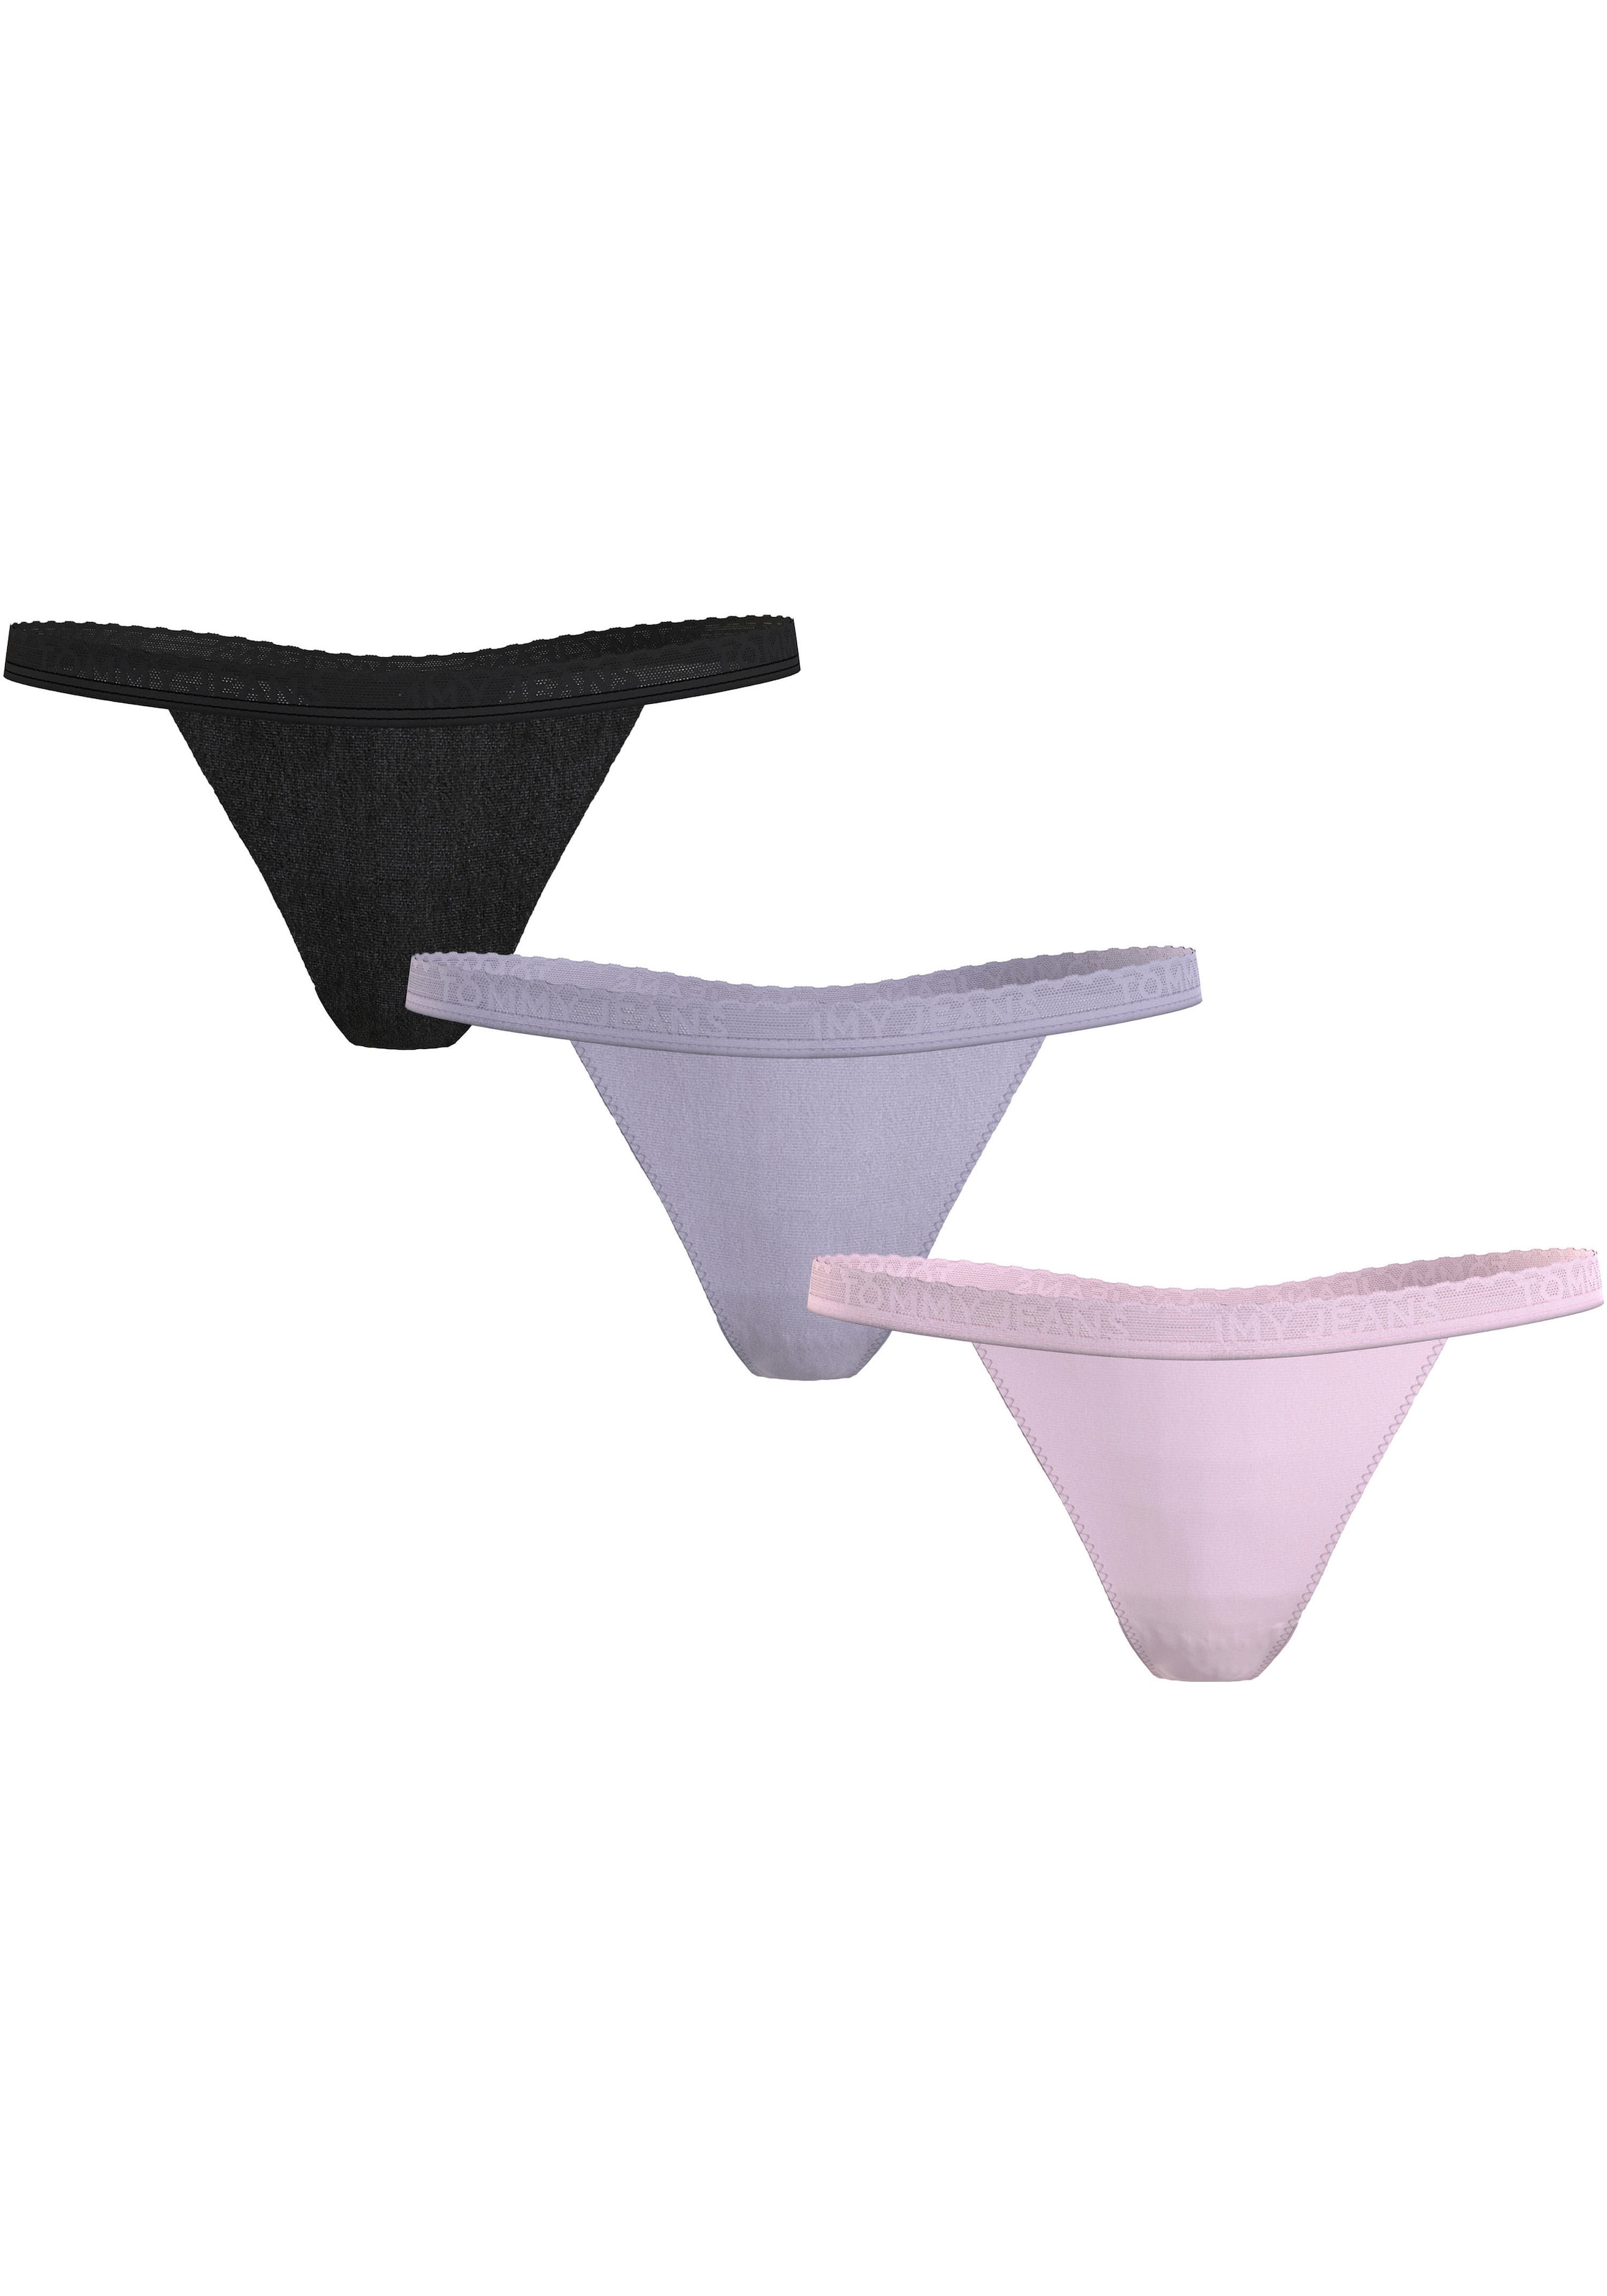 Tommy Hilfiger Underwear Tanga »3P TANGA THONG«, (Packung, 3 St., 3er), mit Tommy Jeans Lgoo-Schriftzug